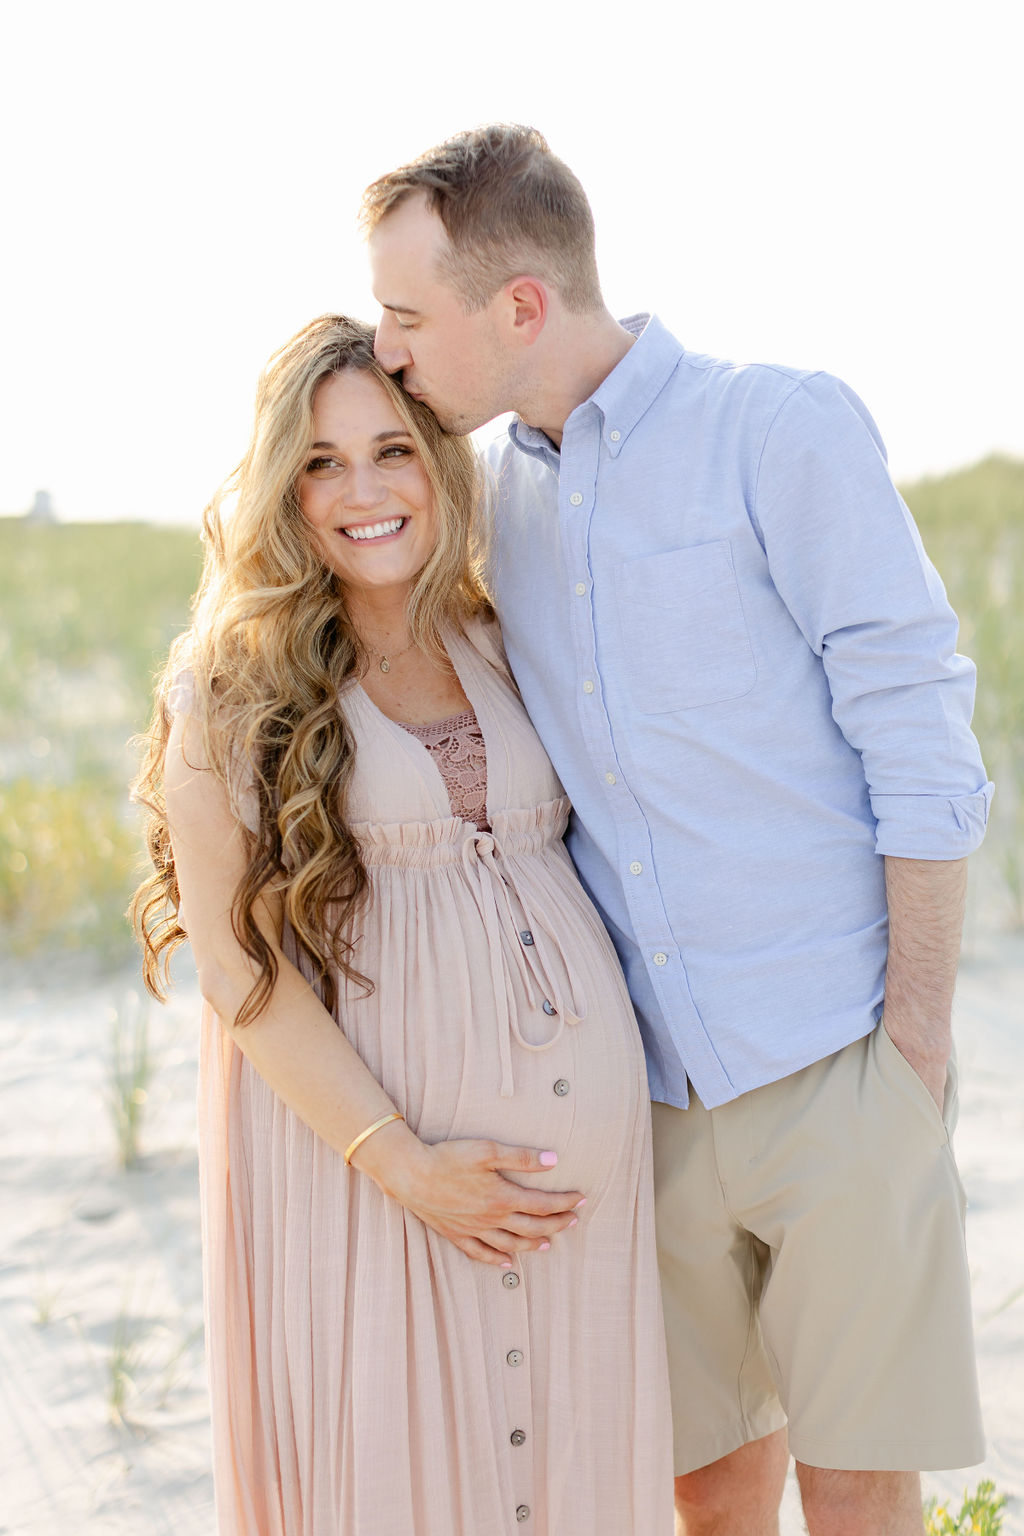 A husband in a blue shirt kisses the head of his pregnant wife while standing on a beach at sunset after visiting birth center charleston sc